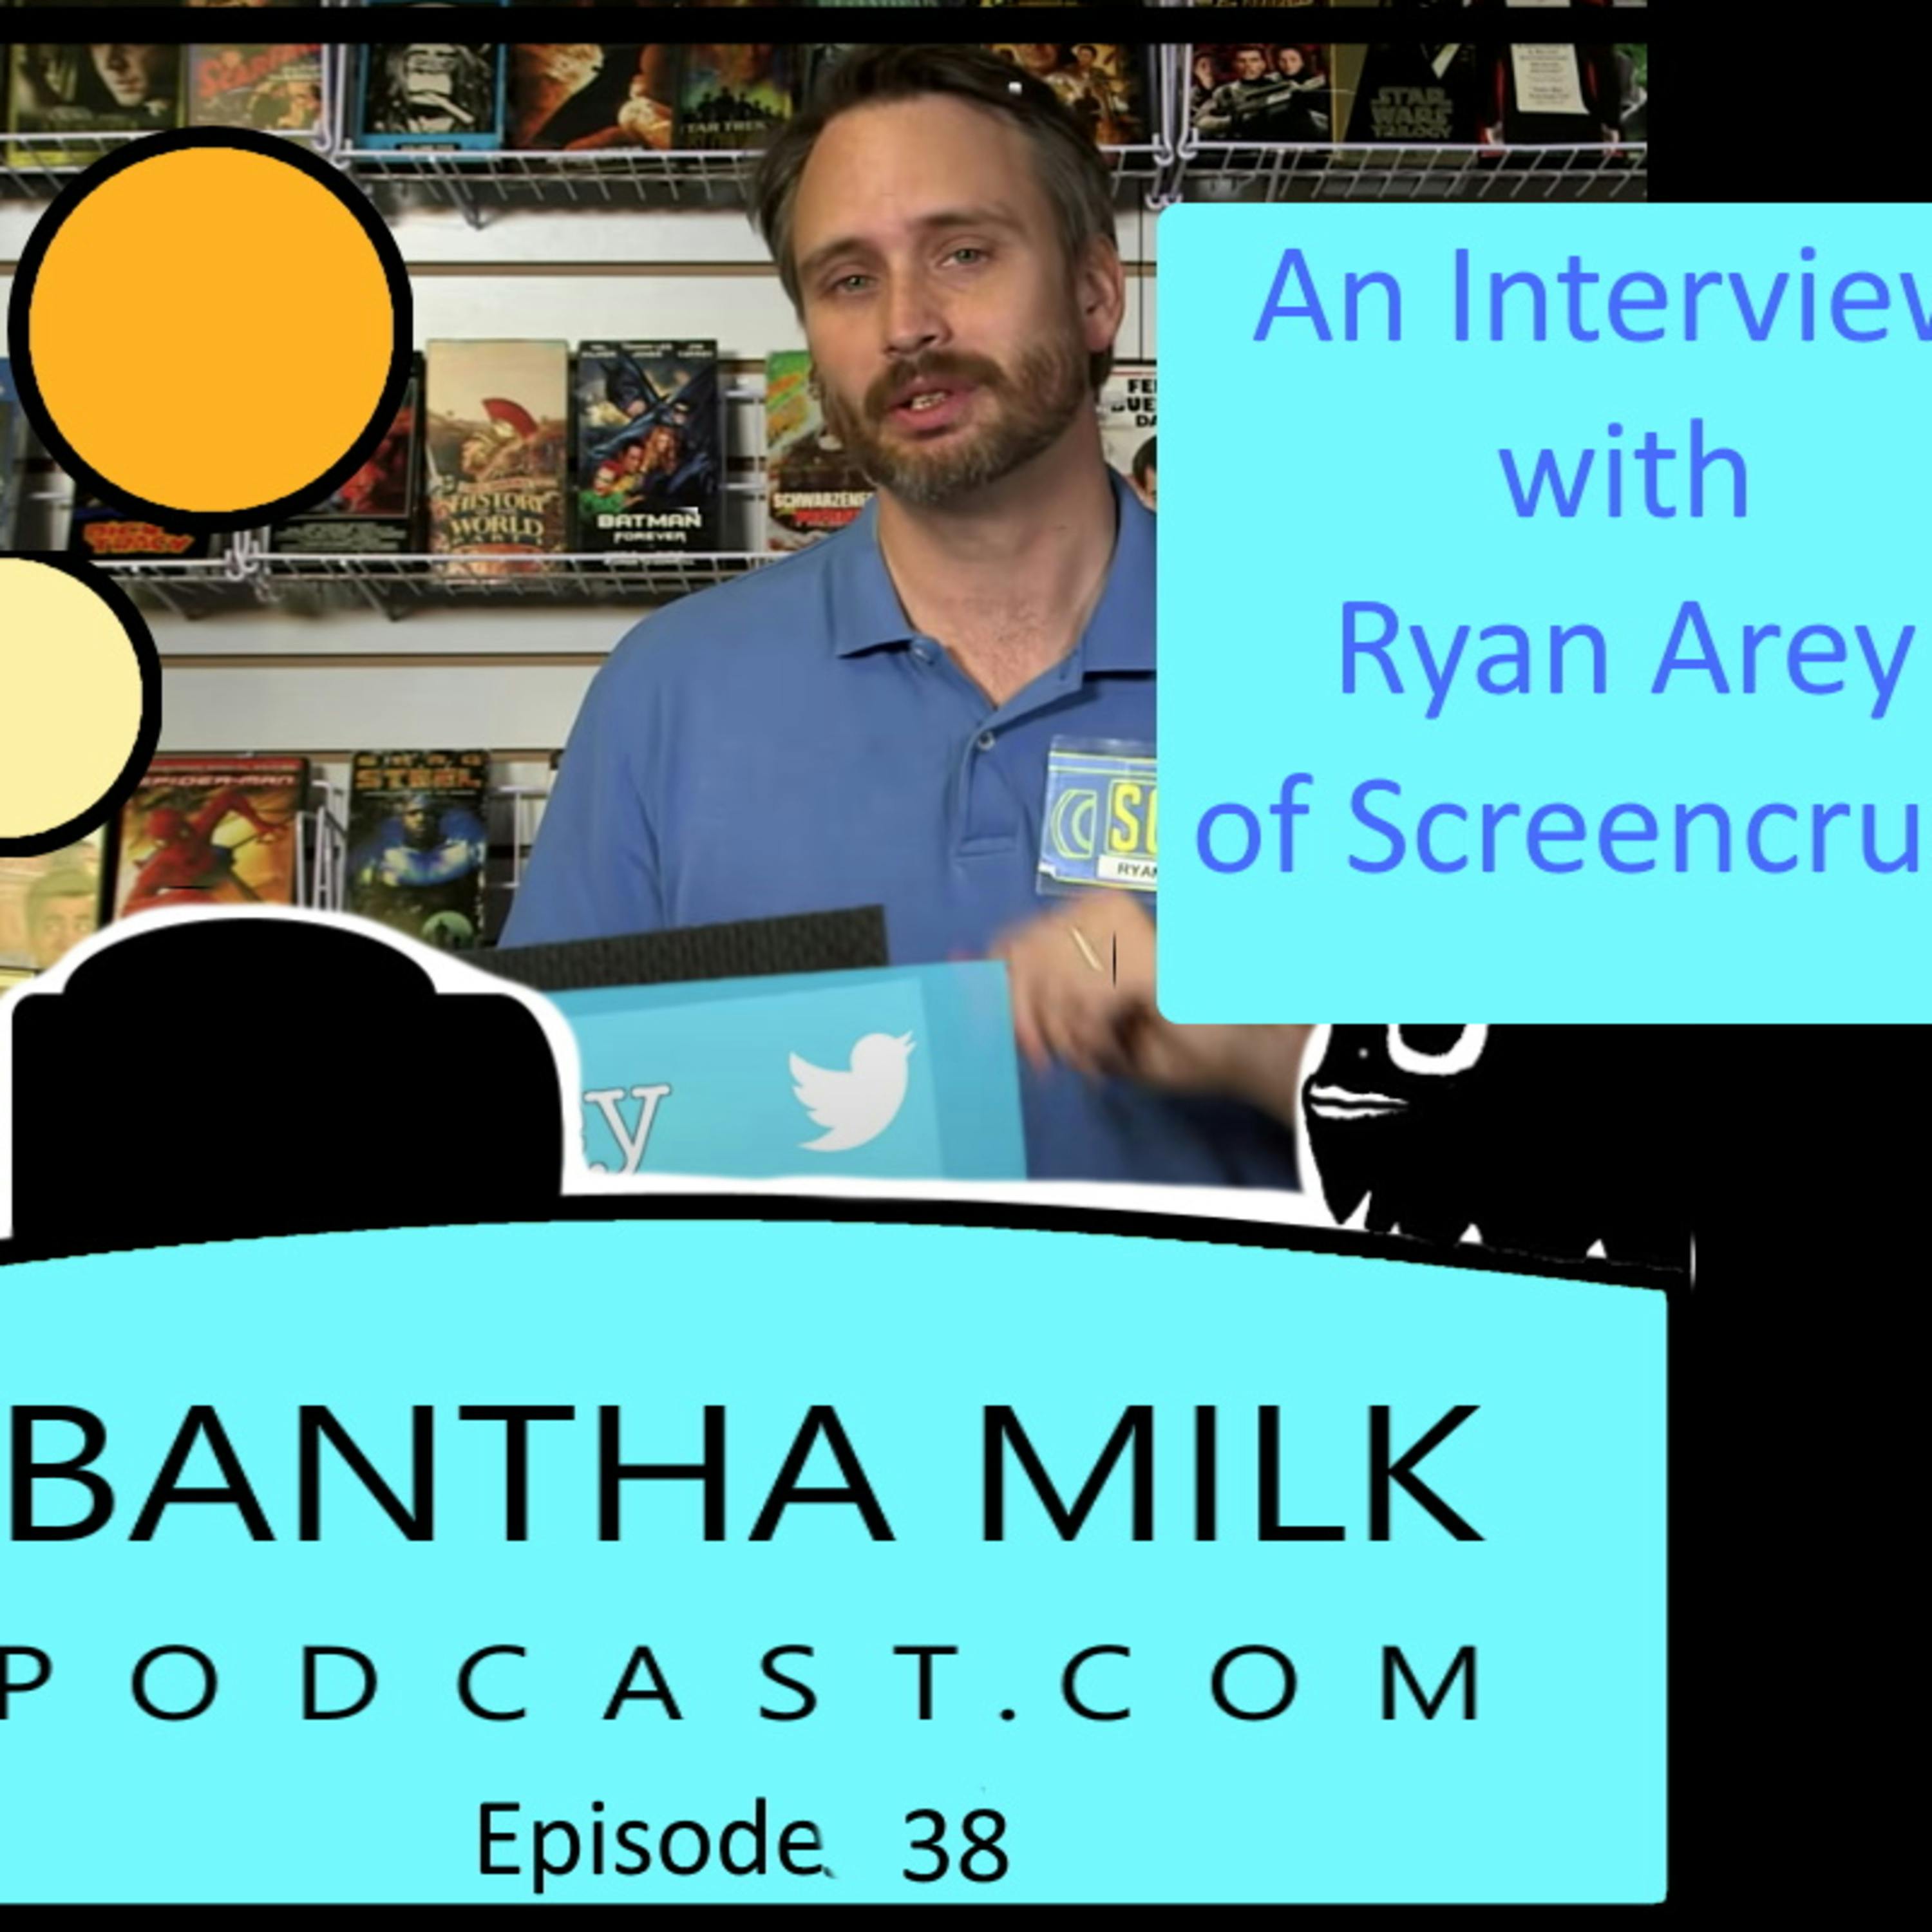 An interview with Ryan Arey of Screencrush